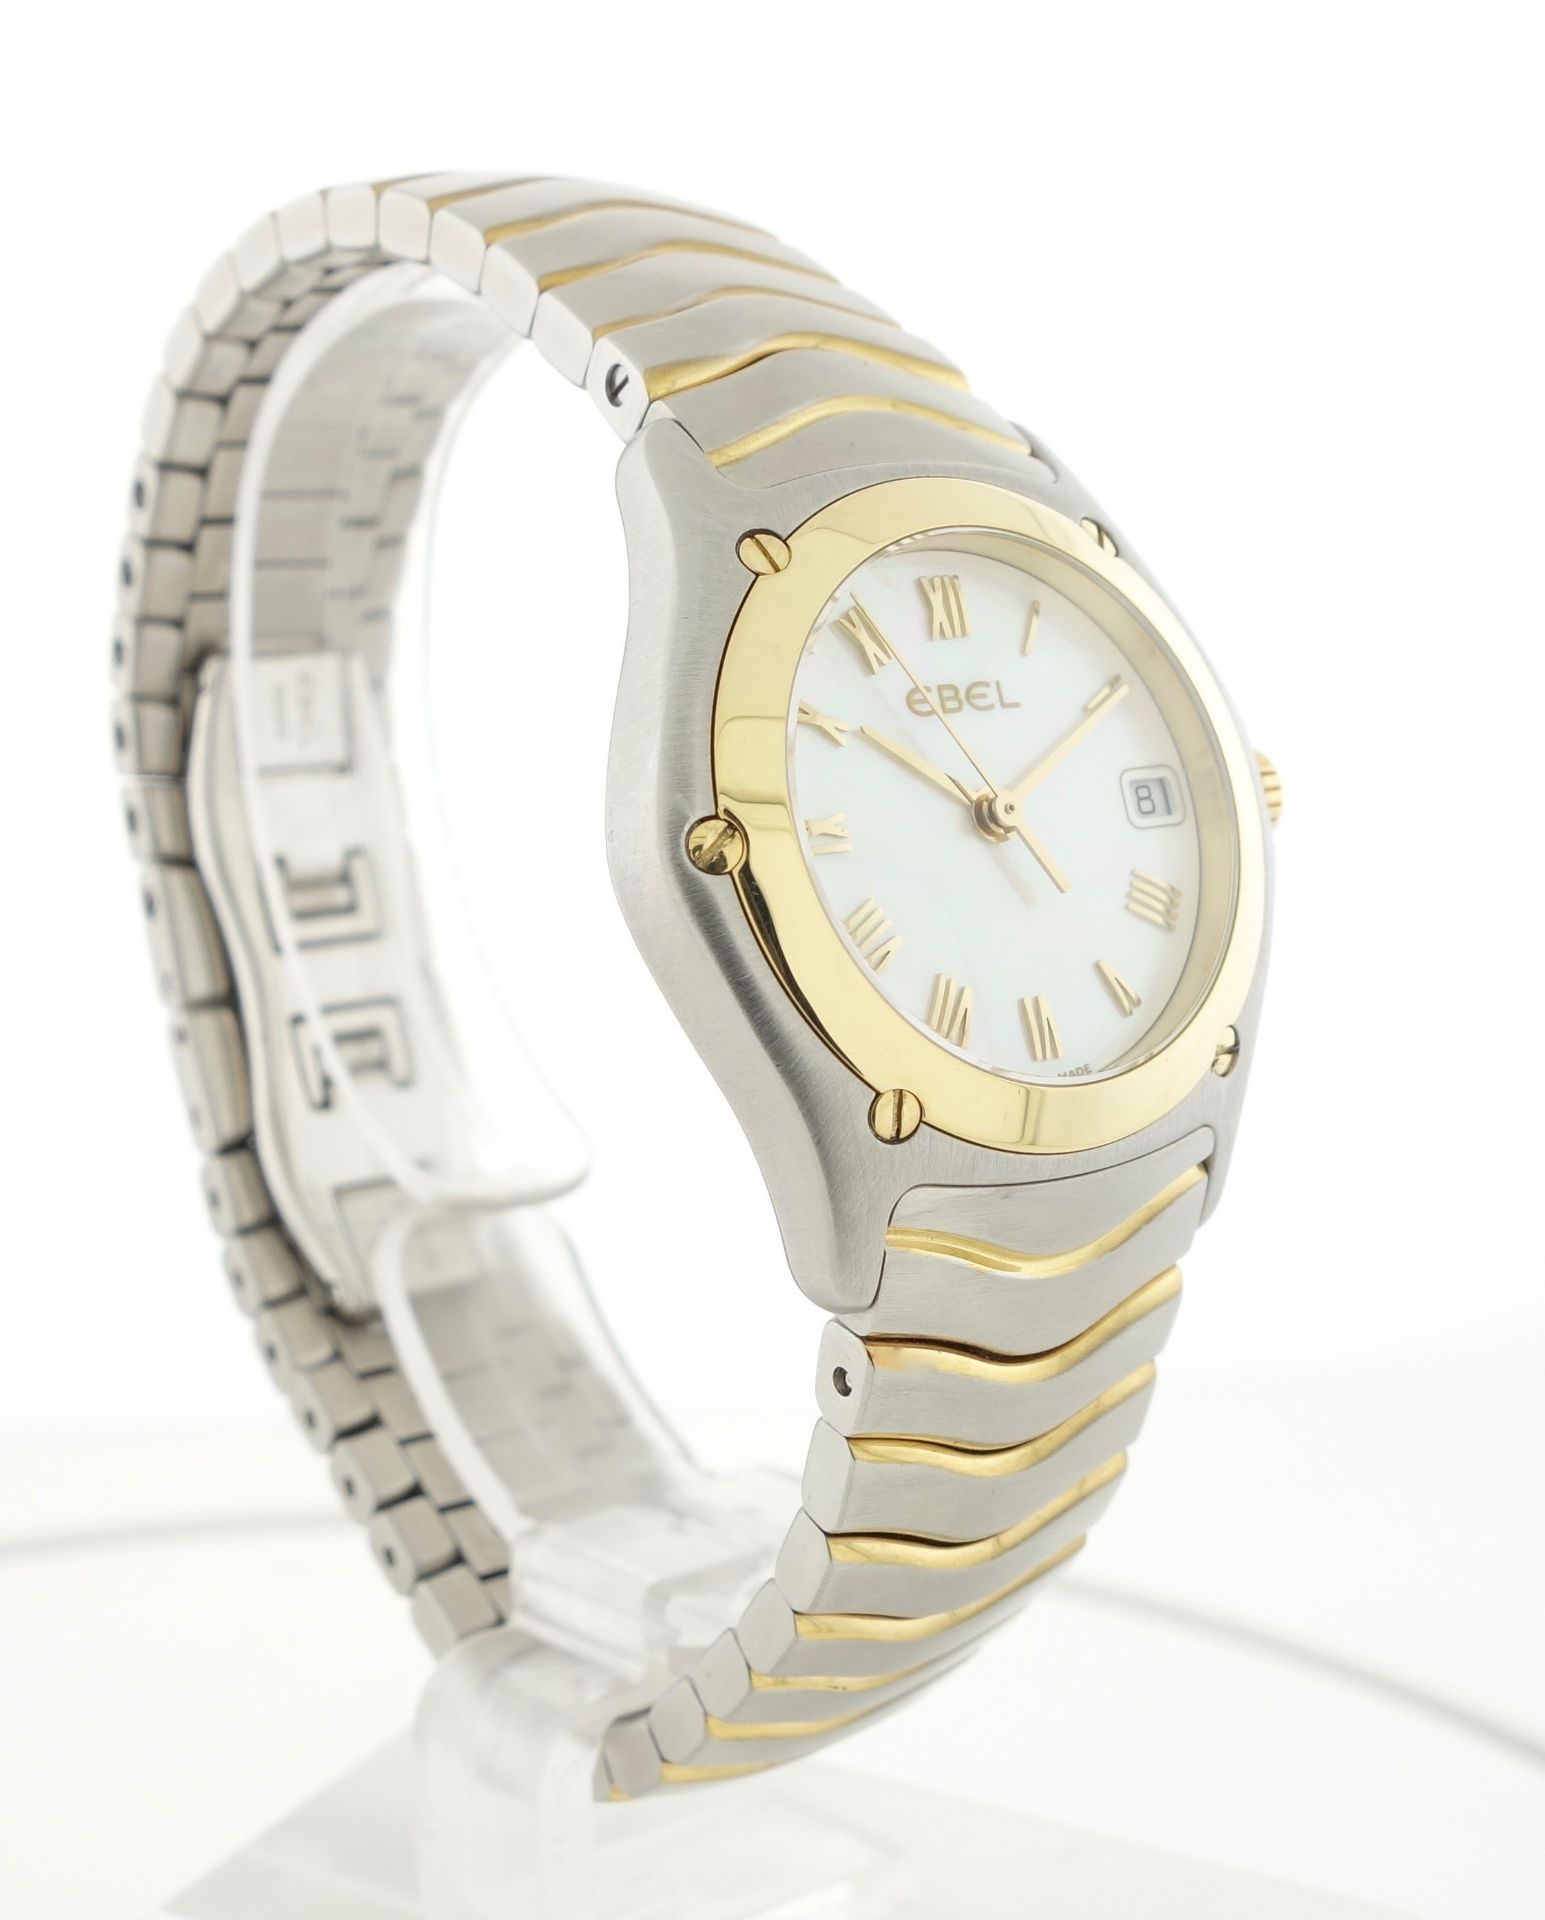 2004 Ebel Ladies Discovery - 1087F21 - Image 3 of 5